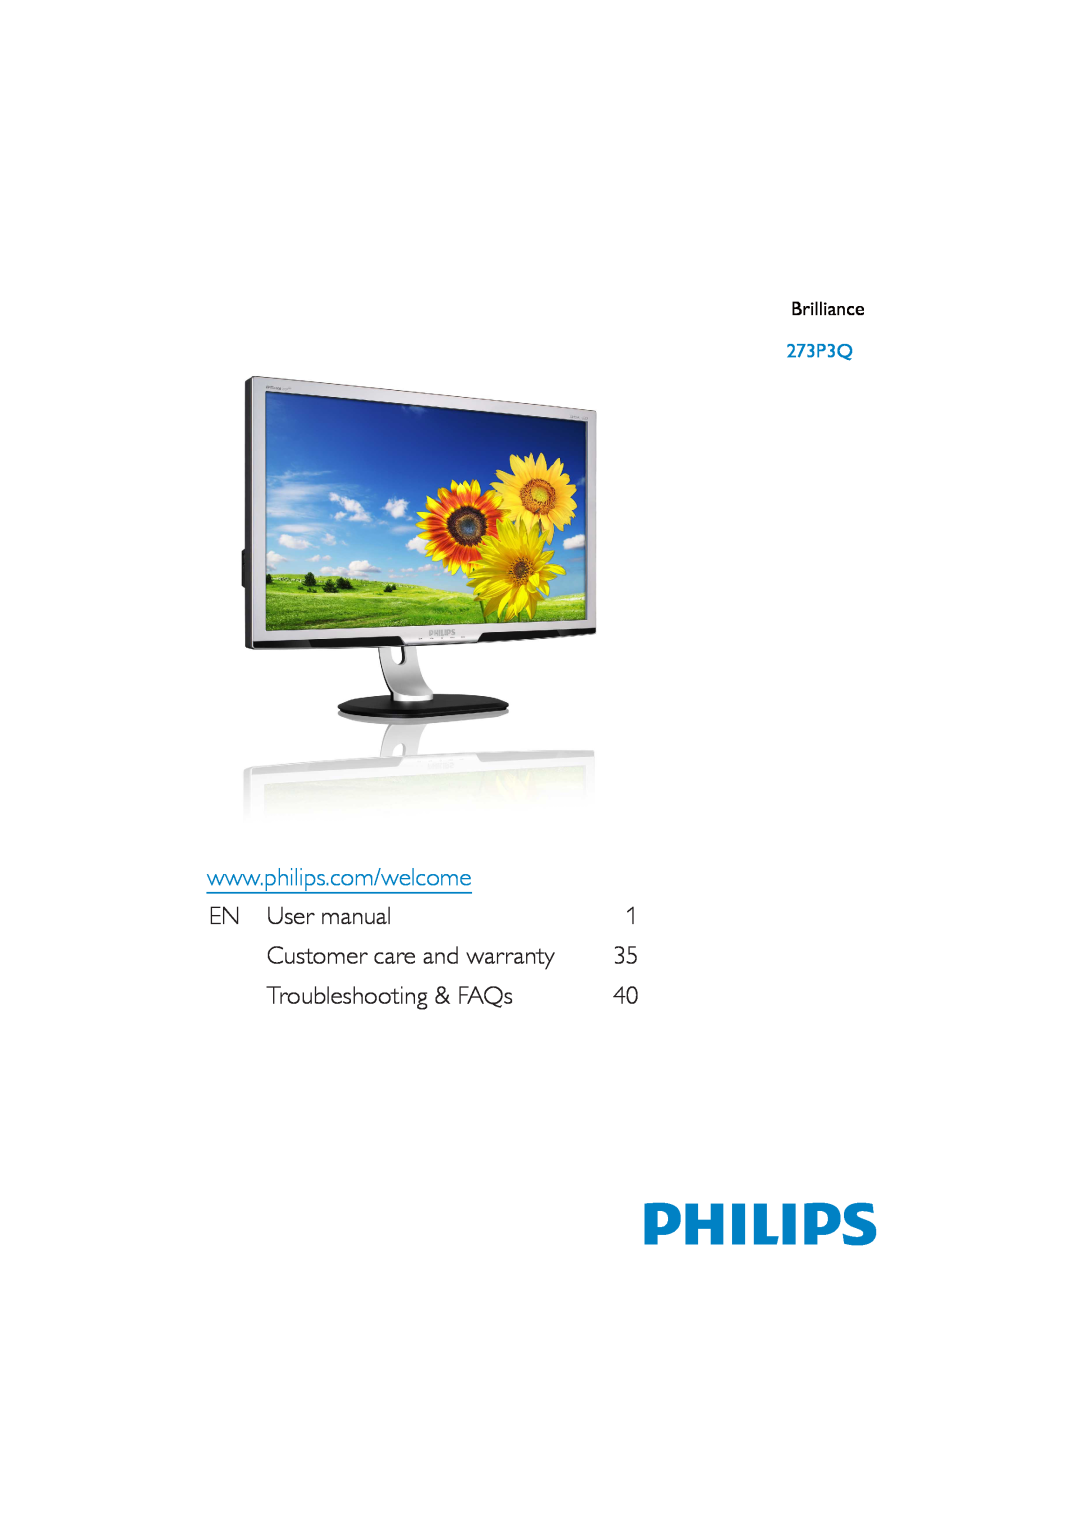 Philips 273P3Q user manual EN User manual, Troubleshooting & FAQs, Customer care and warranty, Brilliance 